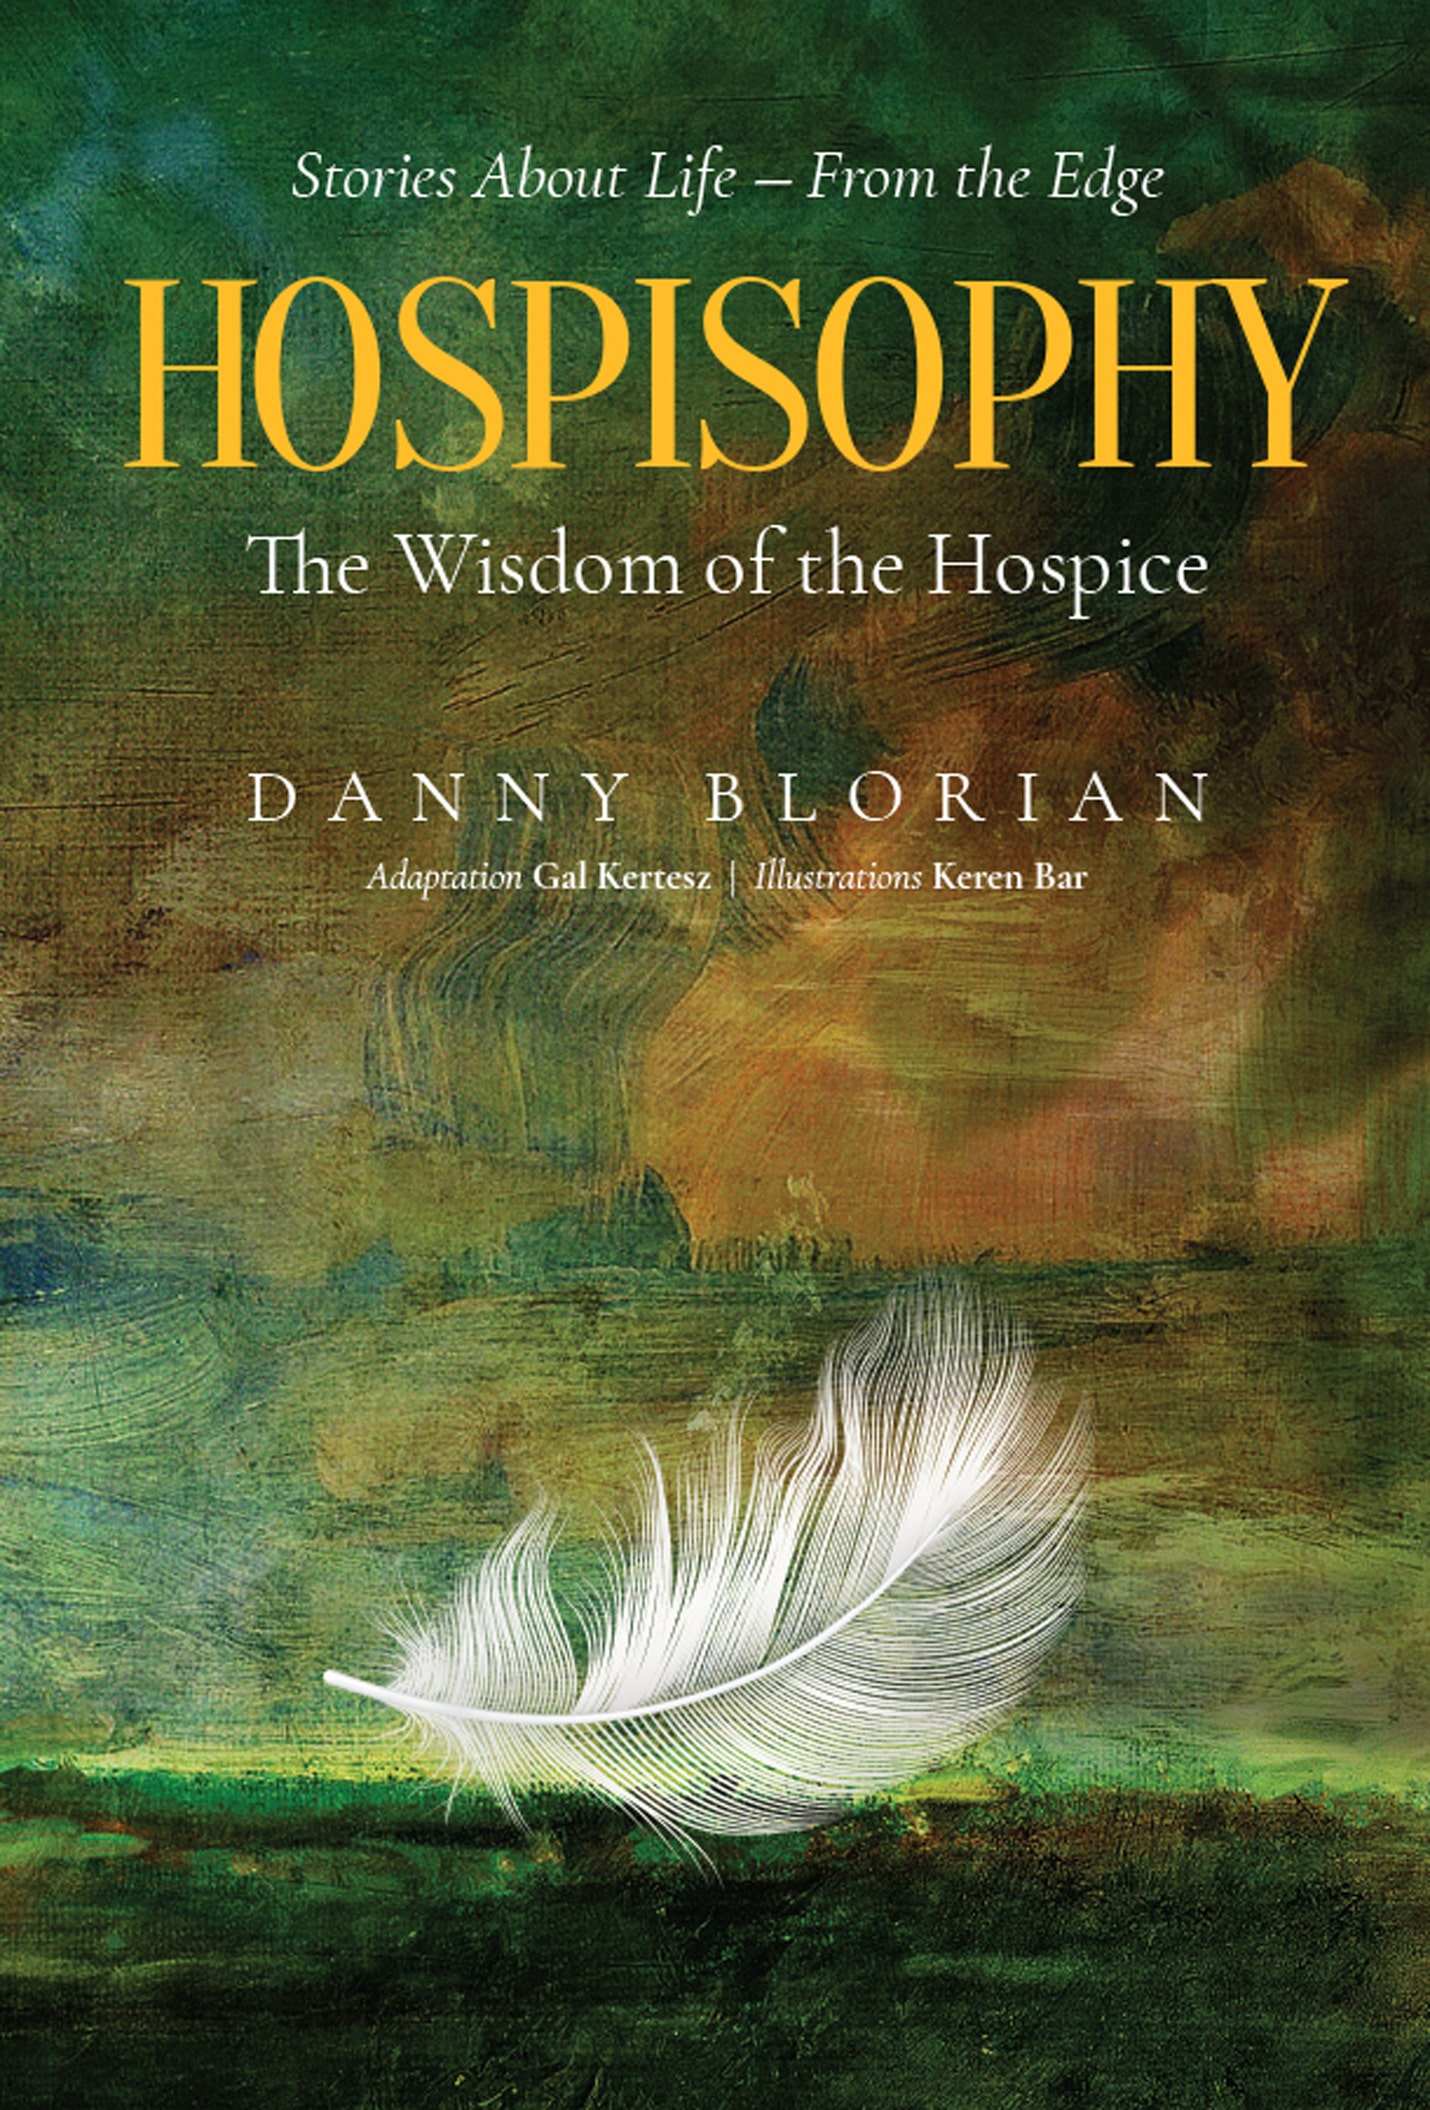 FREE: Hospisophy : The Wisdom of the Hospice by Danny Blorian